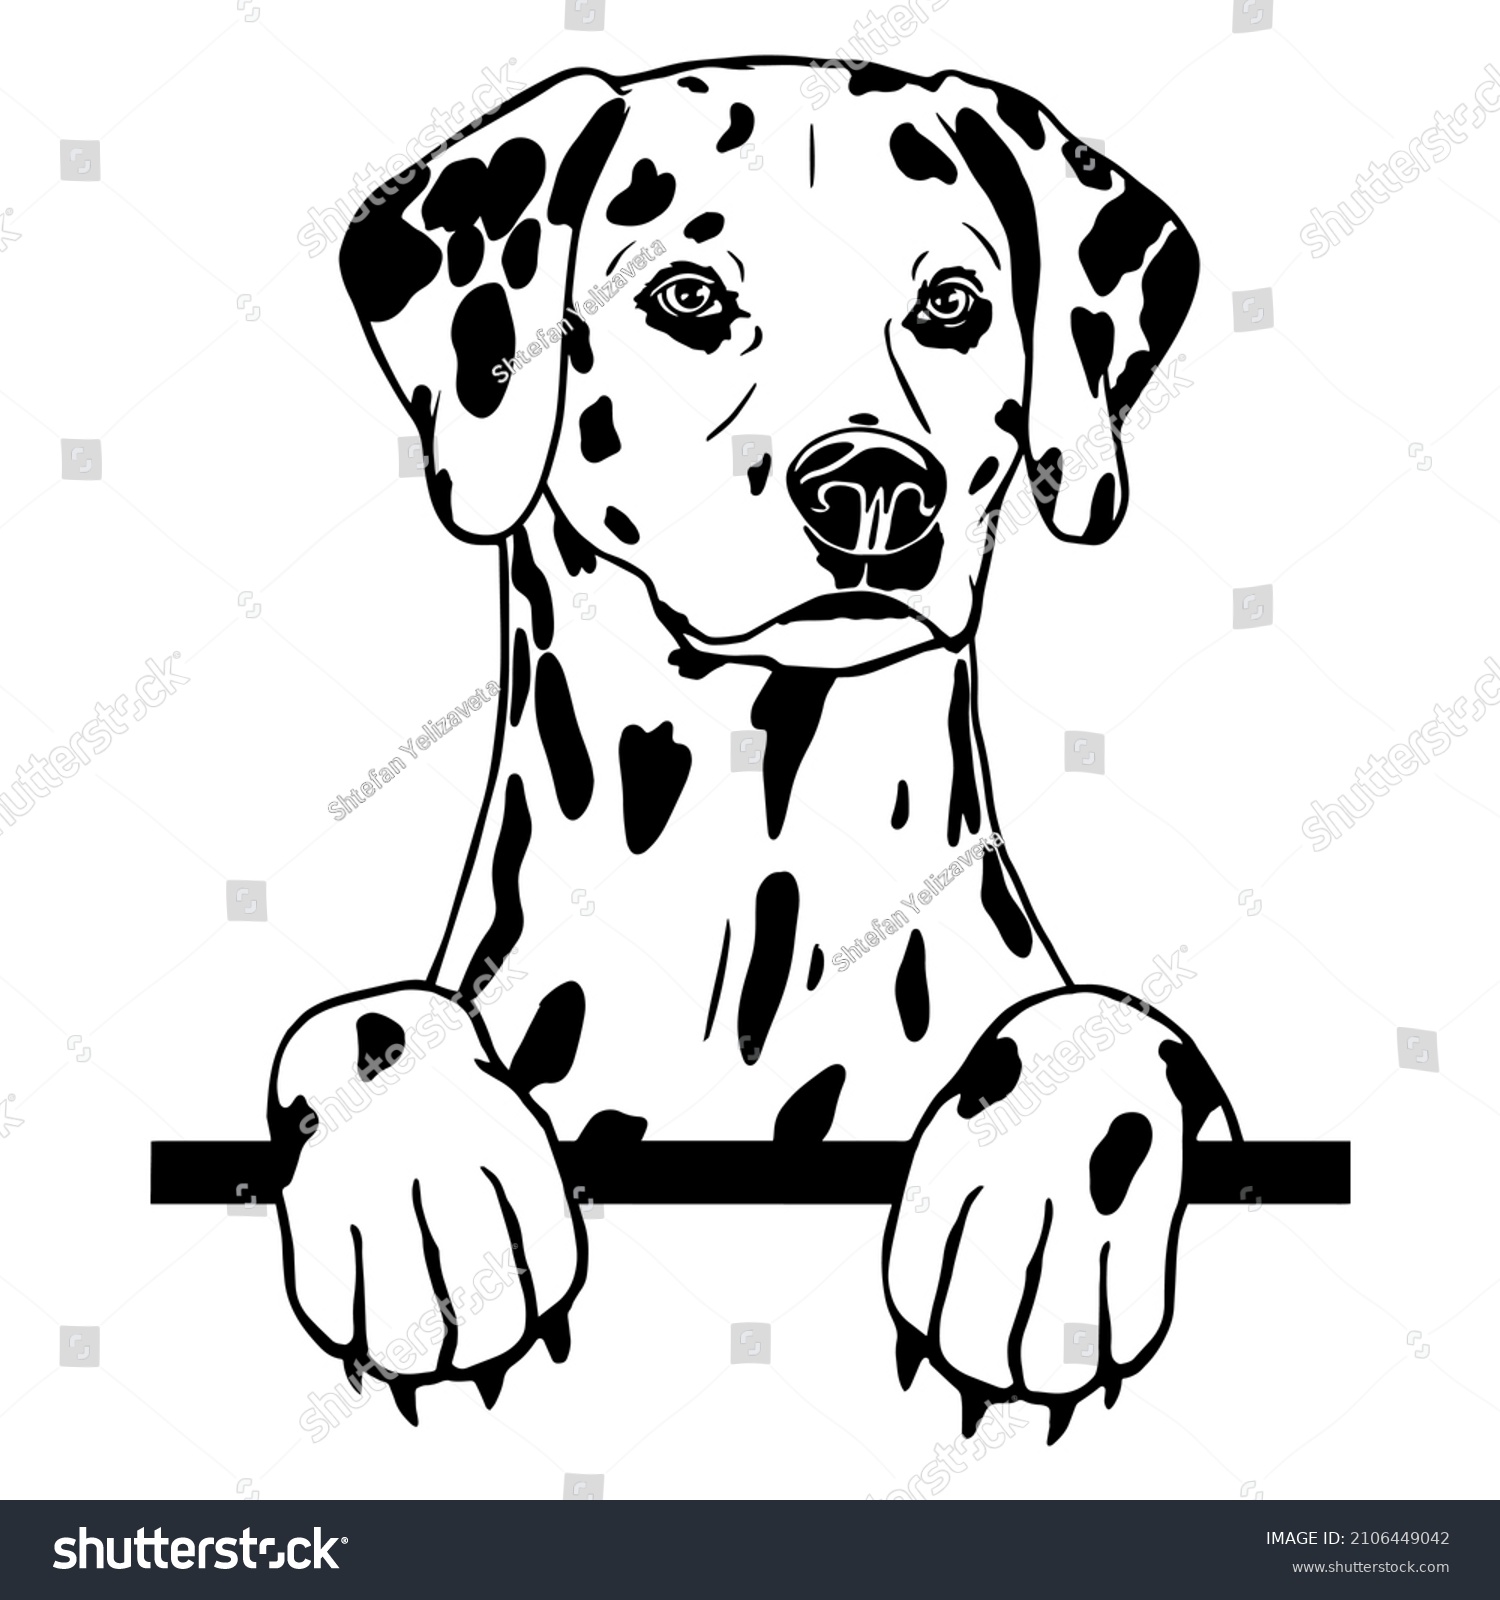 SVG of Dalmatian dog vector illustration.
Looking peeping dog. For cutting vinyl prints and design T shirts and mugs. cut stencil file svg